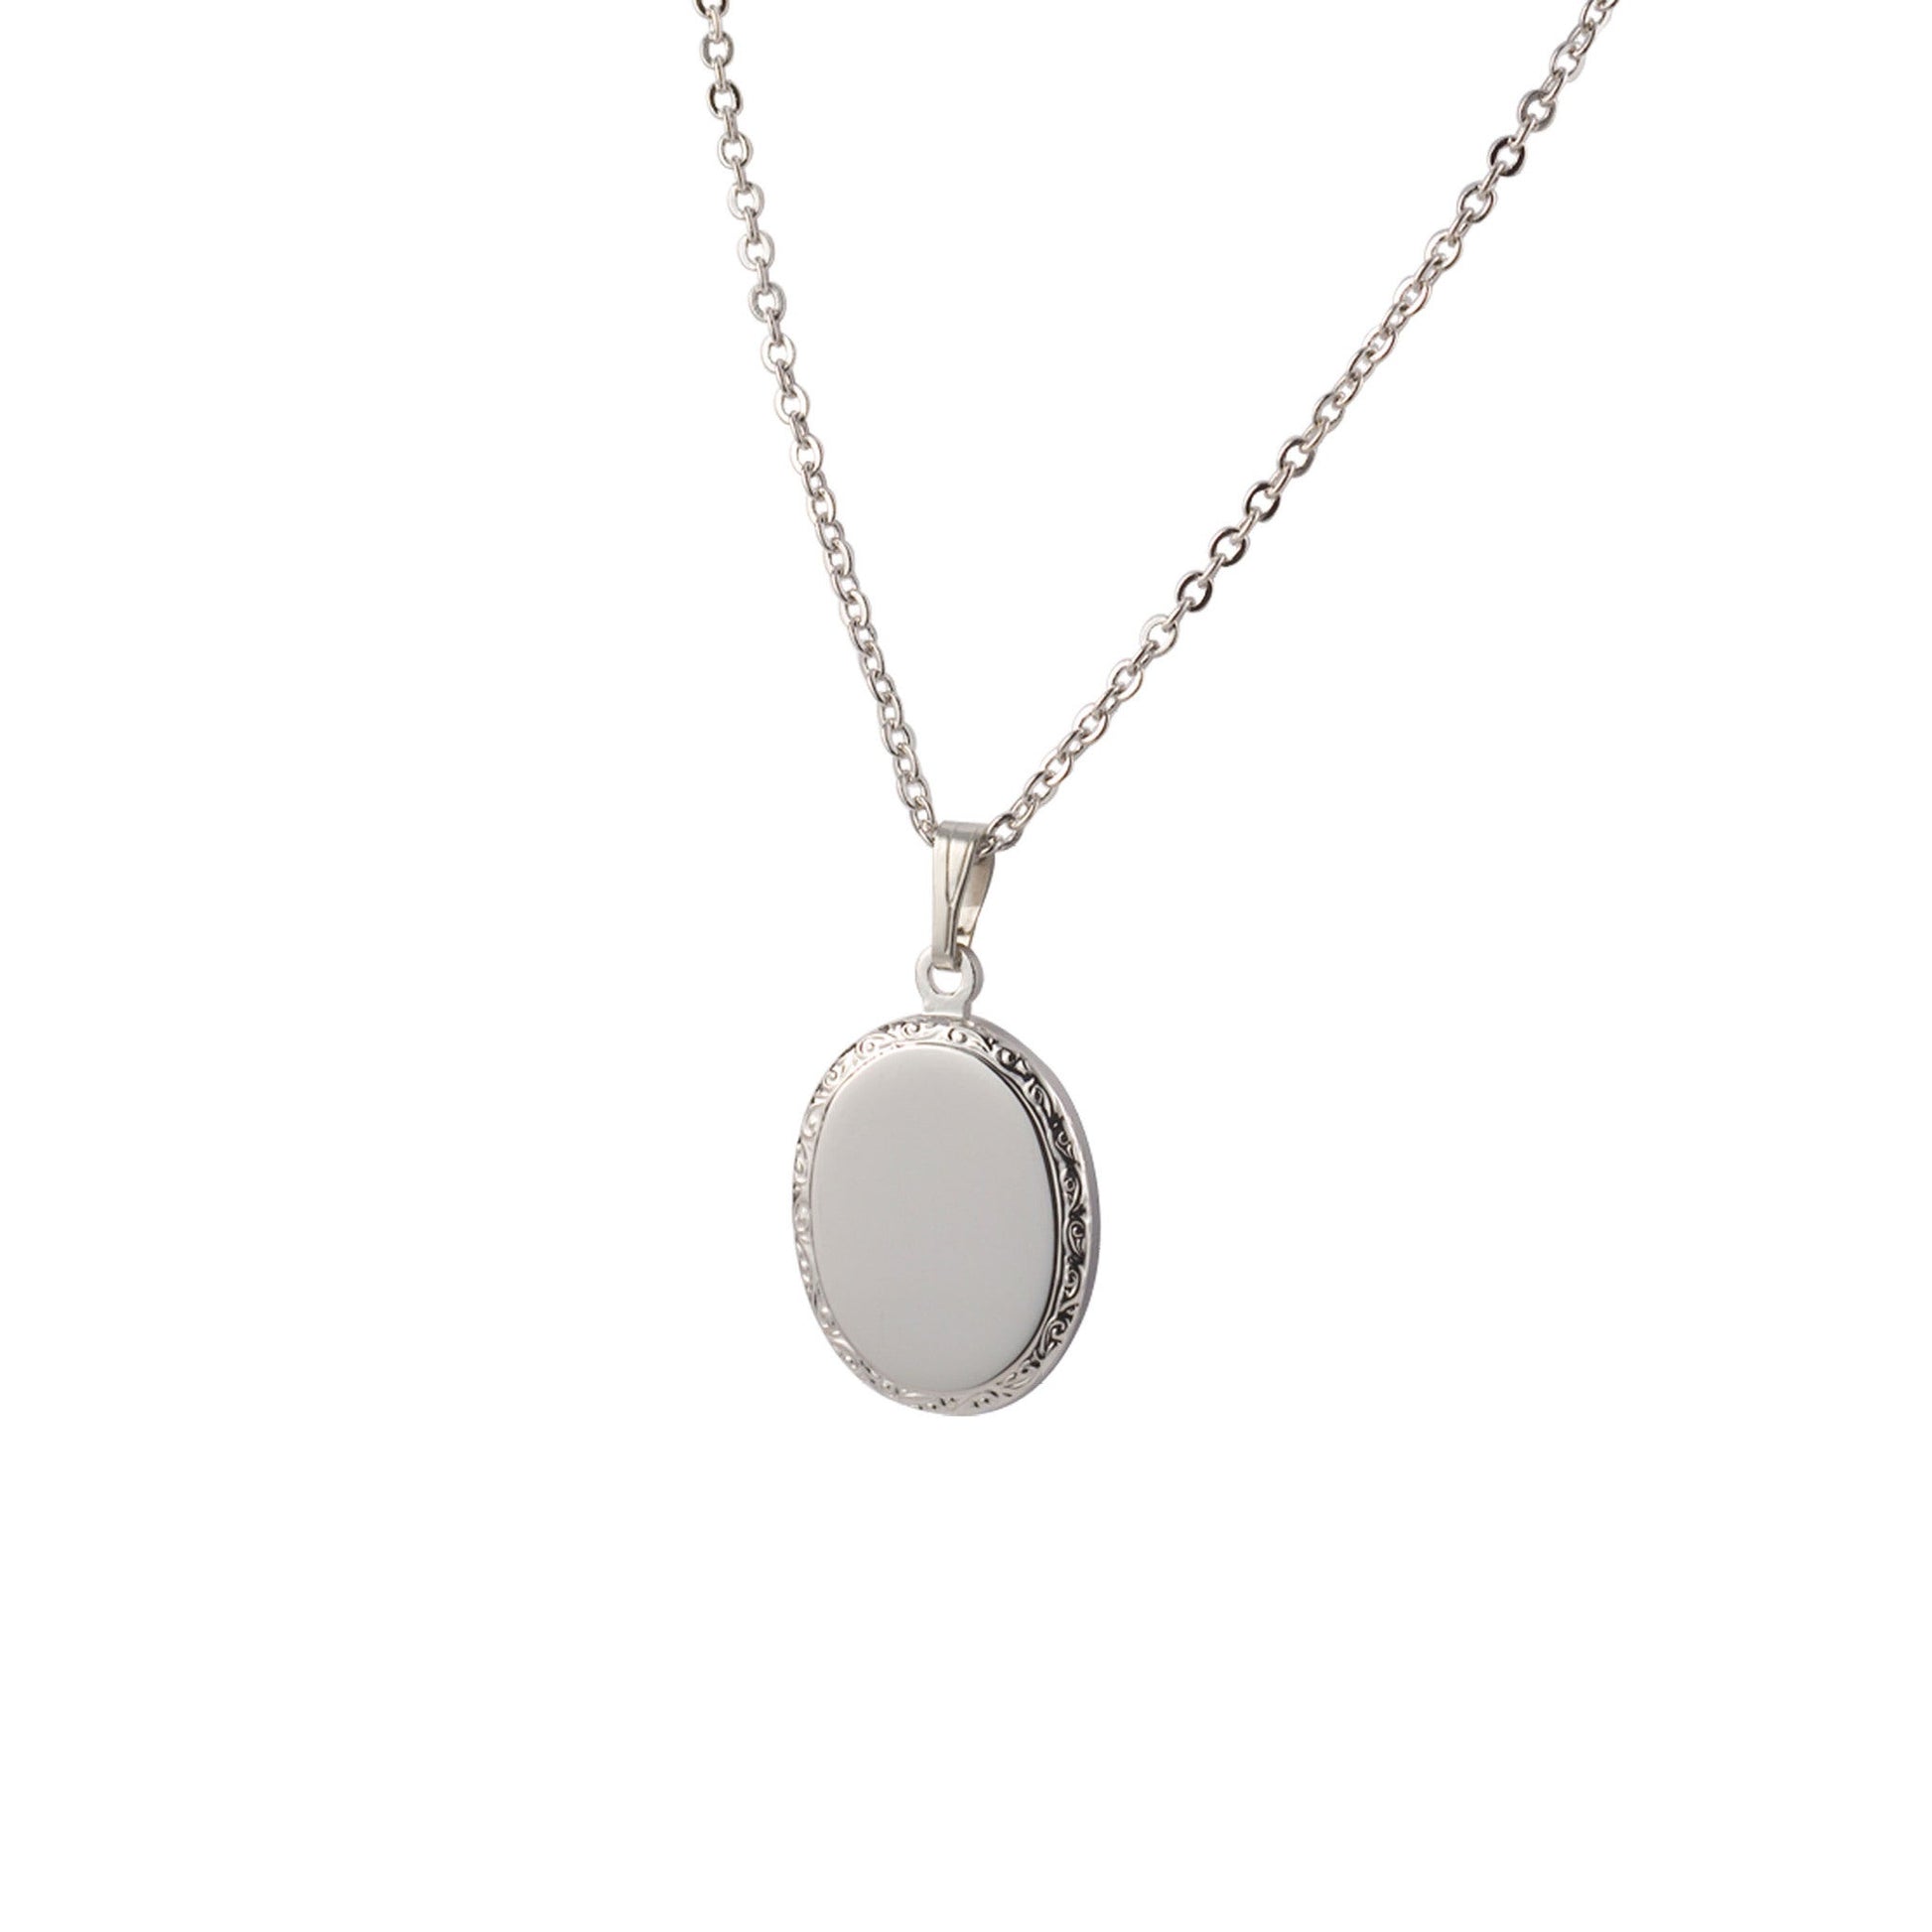 A polished oval filigree necklace displayed on a neutral white background.